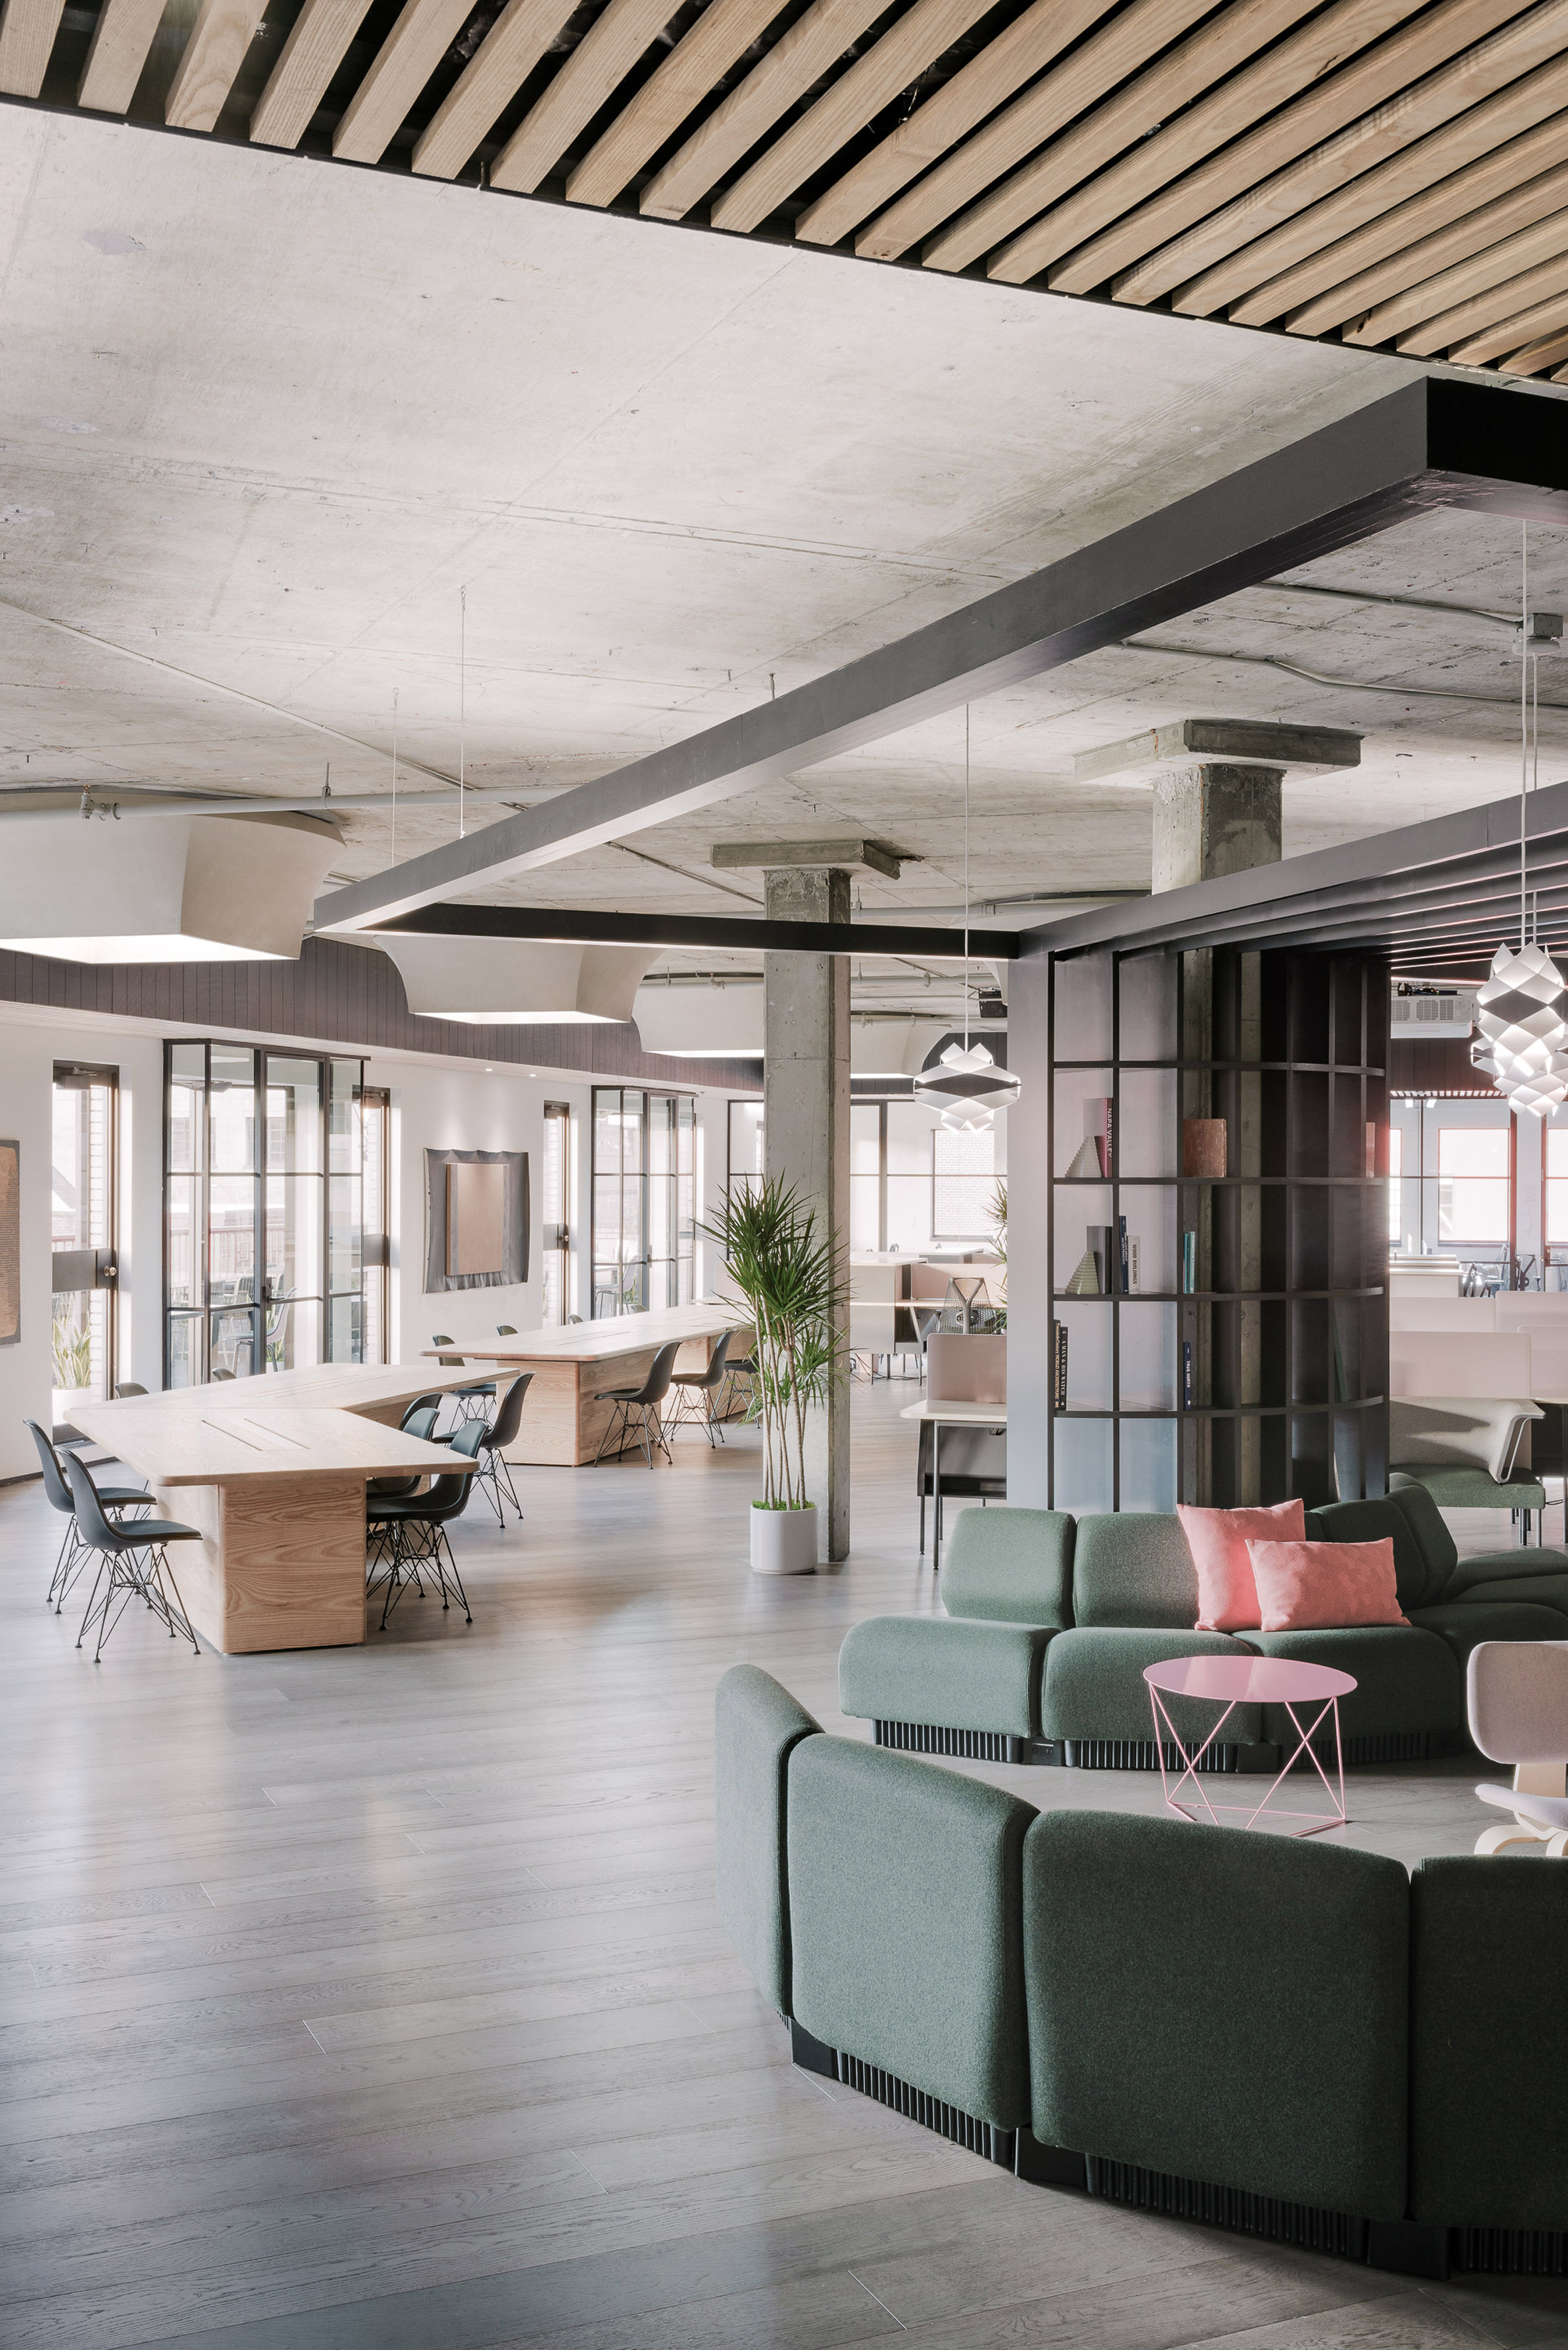 Yves Behar's second Canopy co-working space opens in San Francisco